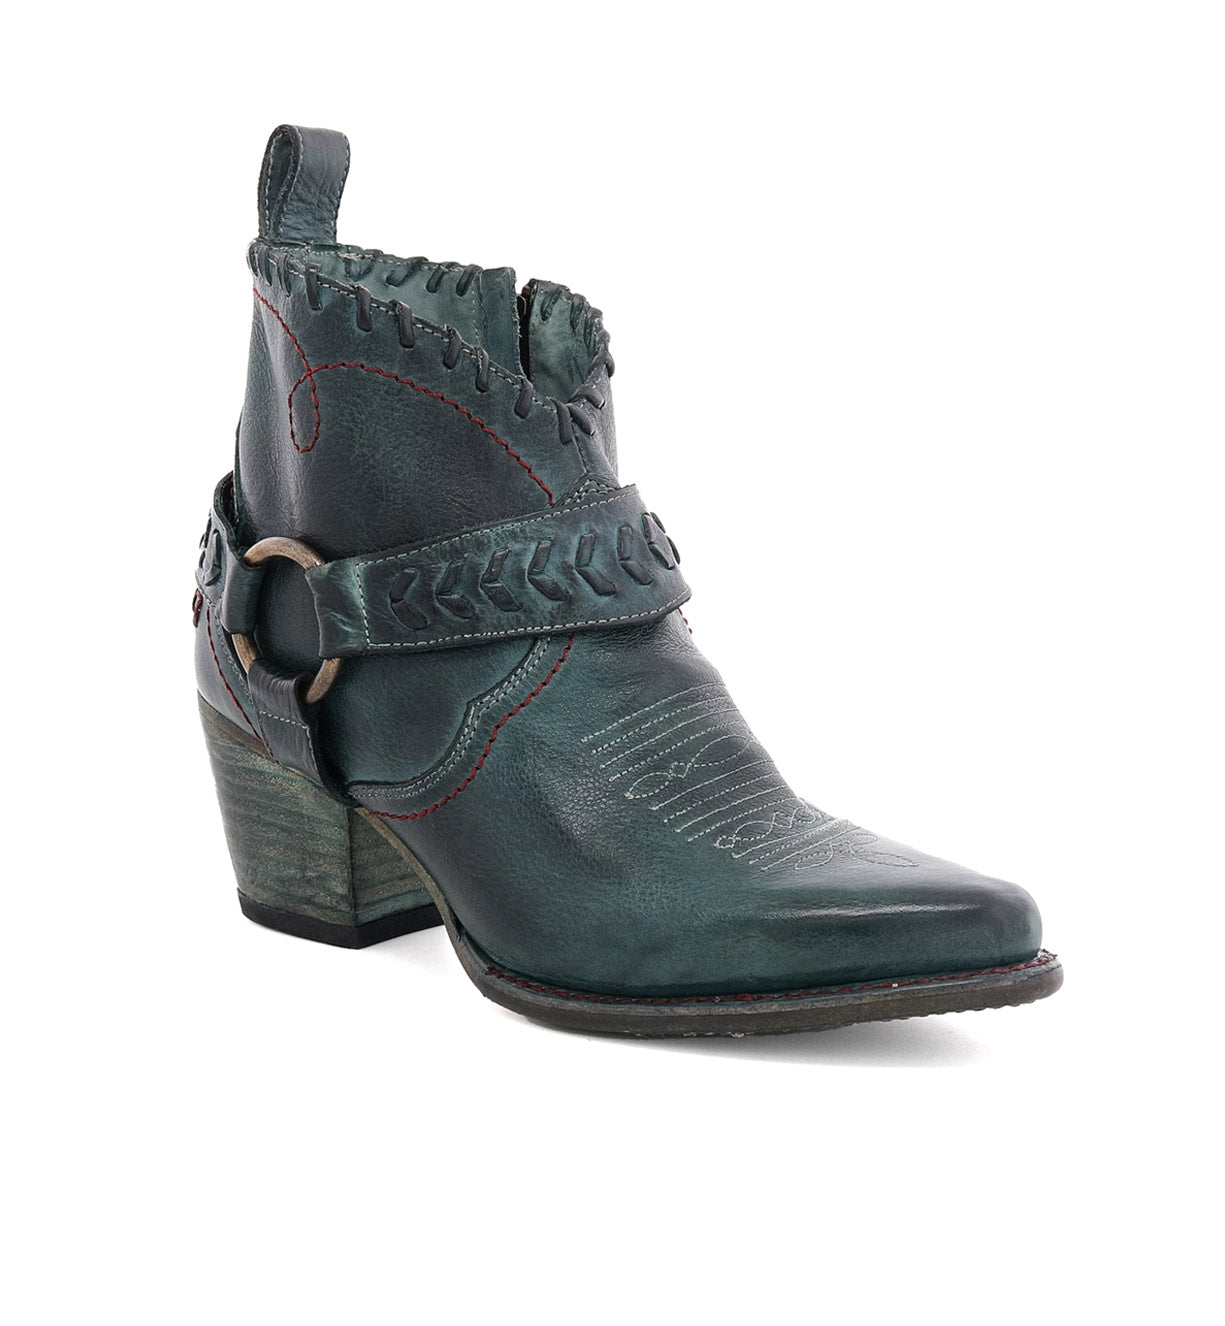 A women's green Tania cowboy boot with a buckle by Bed Stu.